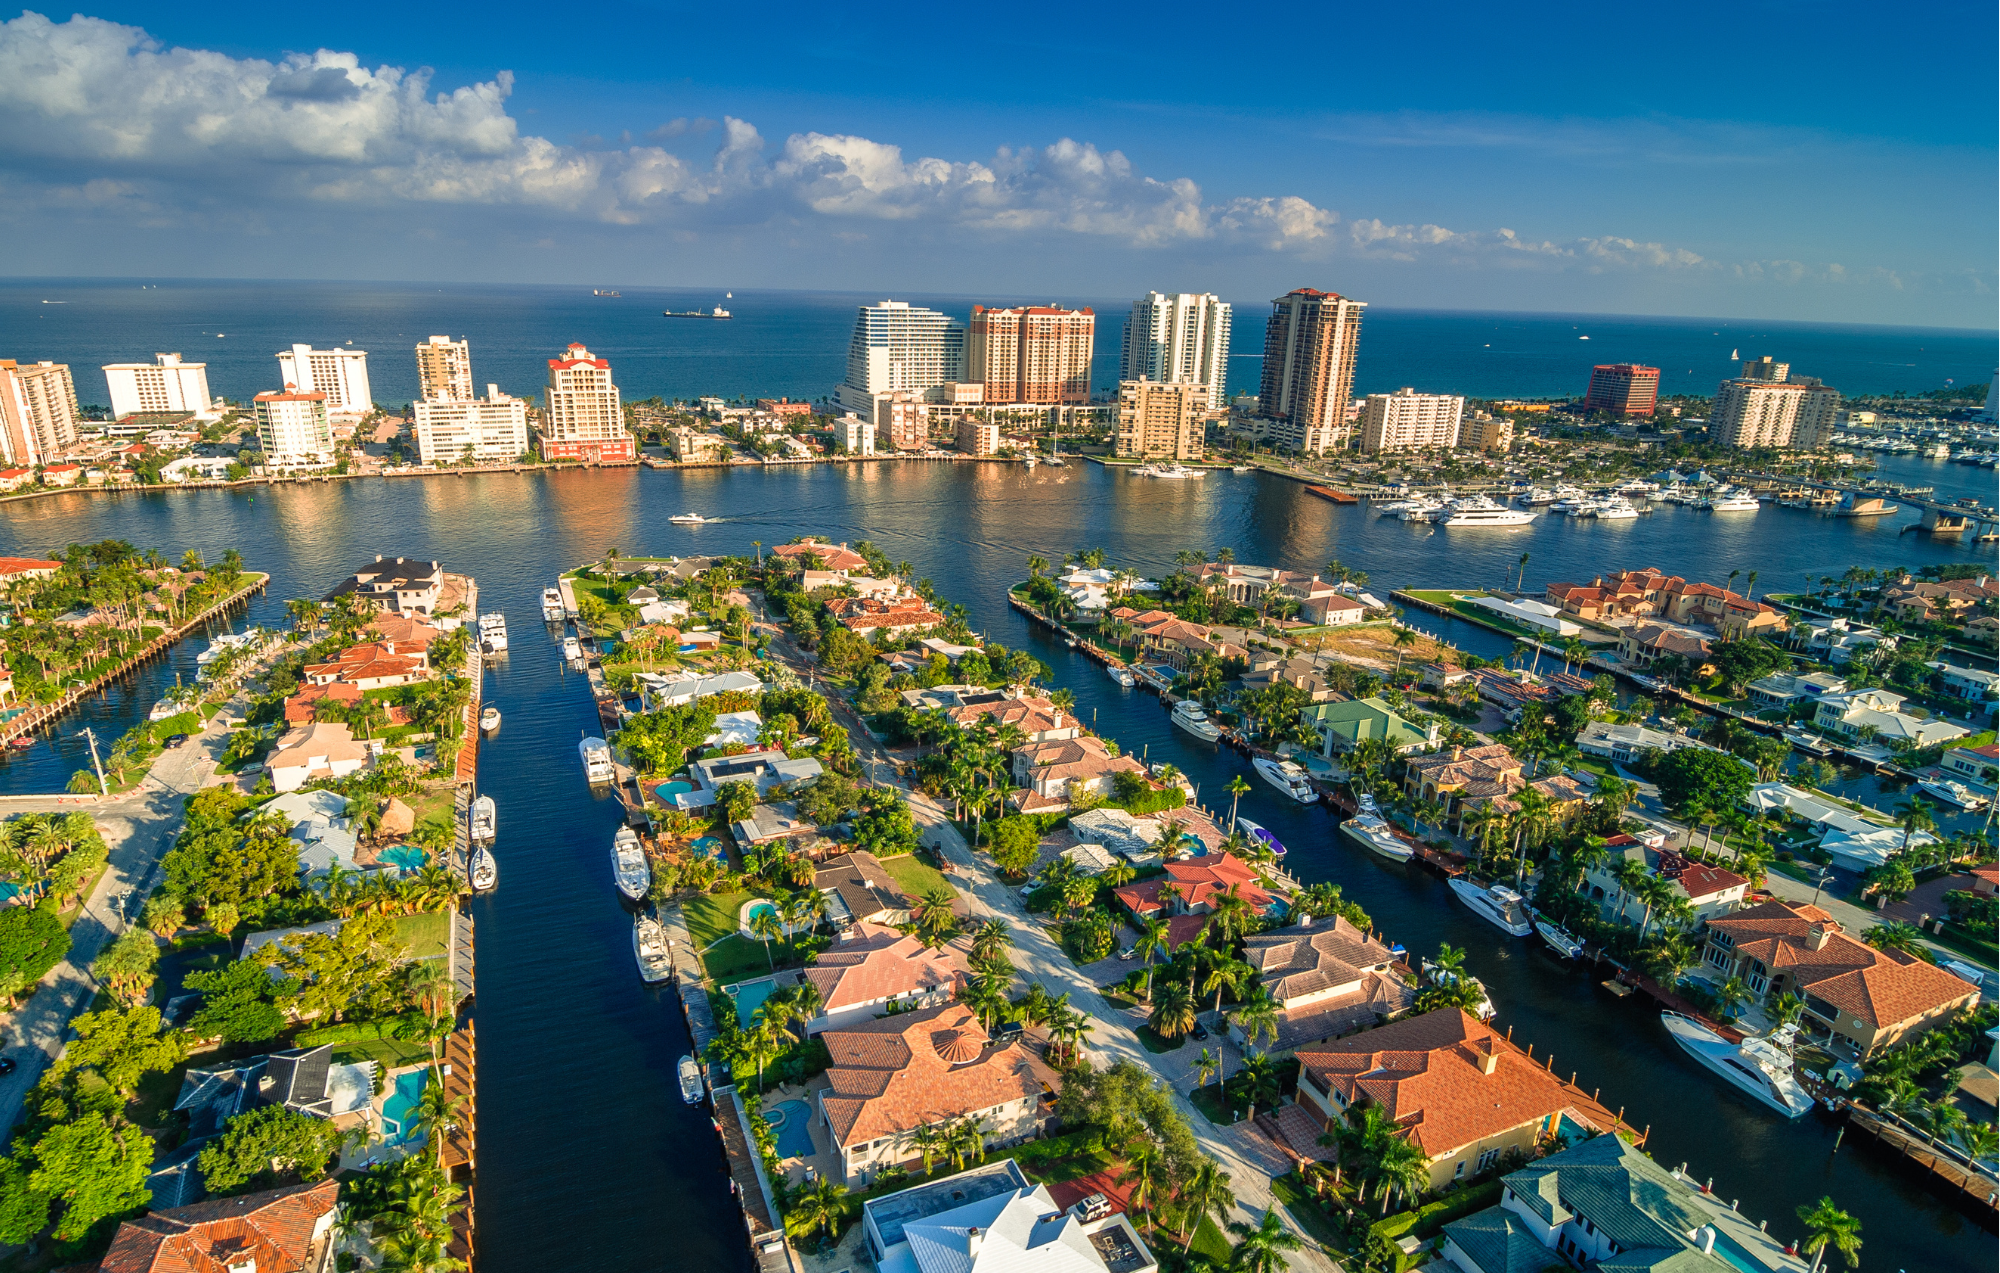 https://realtorbobsells.com/search/#status=active&sold_days=180&pstatus=1%2C11&ls_conversion=acres&location_search_field=Fort%20Lauderdale%2C%20FL&drive_time=09%3A00&drive_duration=15&drive_avoid_ferry=1&drive_departure=1&ss_locale=en-US&ss_description=Fort%20Lauderdale%2C%20FL&ss_email_freq=40&ss_send_zero_result=1&center_lat=26.1224386&center_lon=-80.13731740000001&center_lat_pan=26.14124366124178&center_lon_pan=-80.1498074915665&geotype=PopulatedPlace&user_lat=26.1224386&user_lon=-80.13731740000001&pgsize=20&startidx=0&zoom=11&sort_by=1&company_uuid=4059187&commute=0&buffer_miles=0.25&geospatial=true&agent_uuid=c8693e92-6345-48cd-ae45-dc53c20f791f&ptype=1%2C2%2C3%2C4%2C5%2C7%2C9&searchType=criteria&omit_hidden=true&ex_pend=true&currency=USD